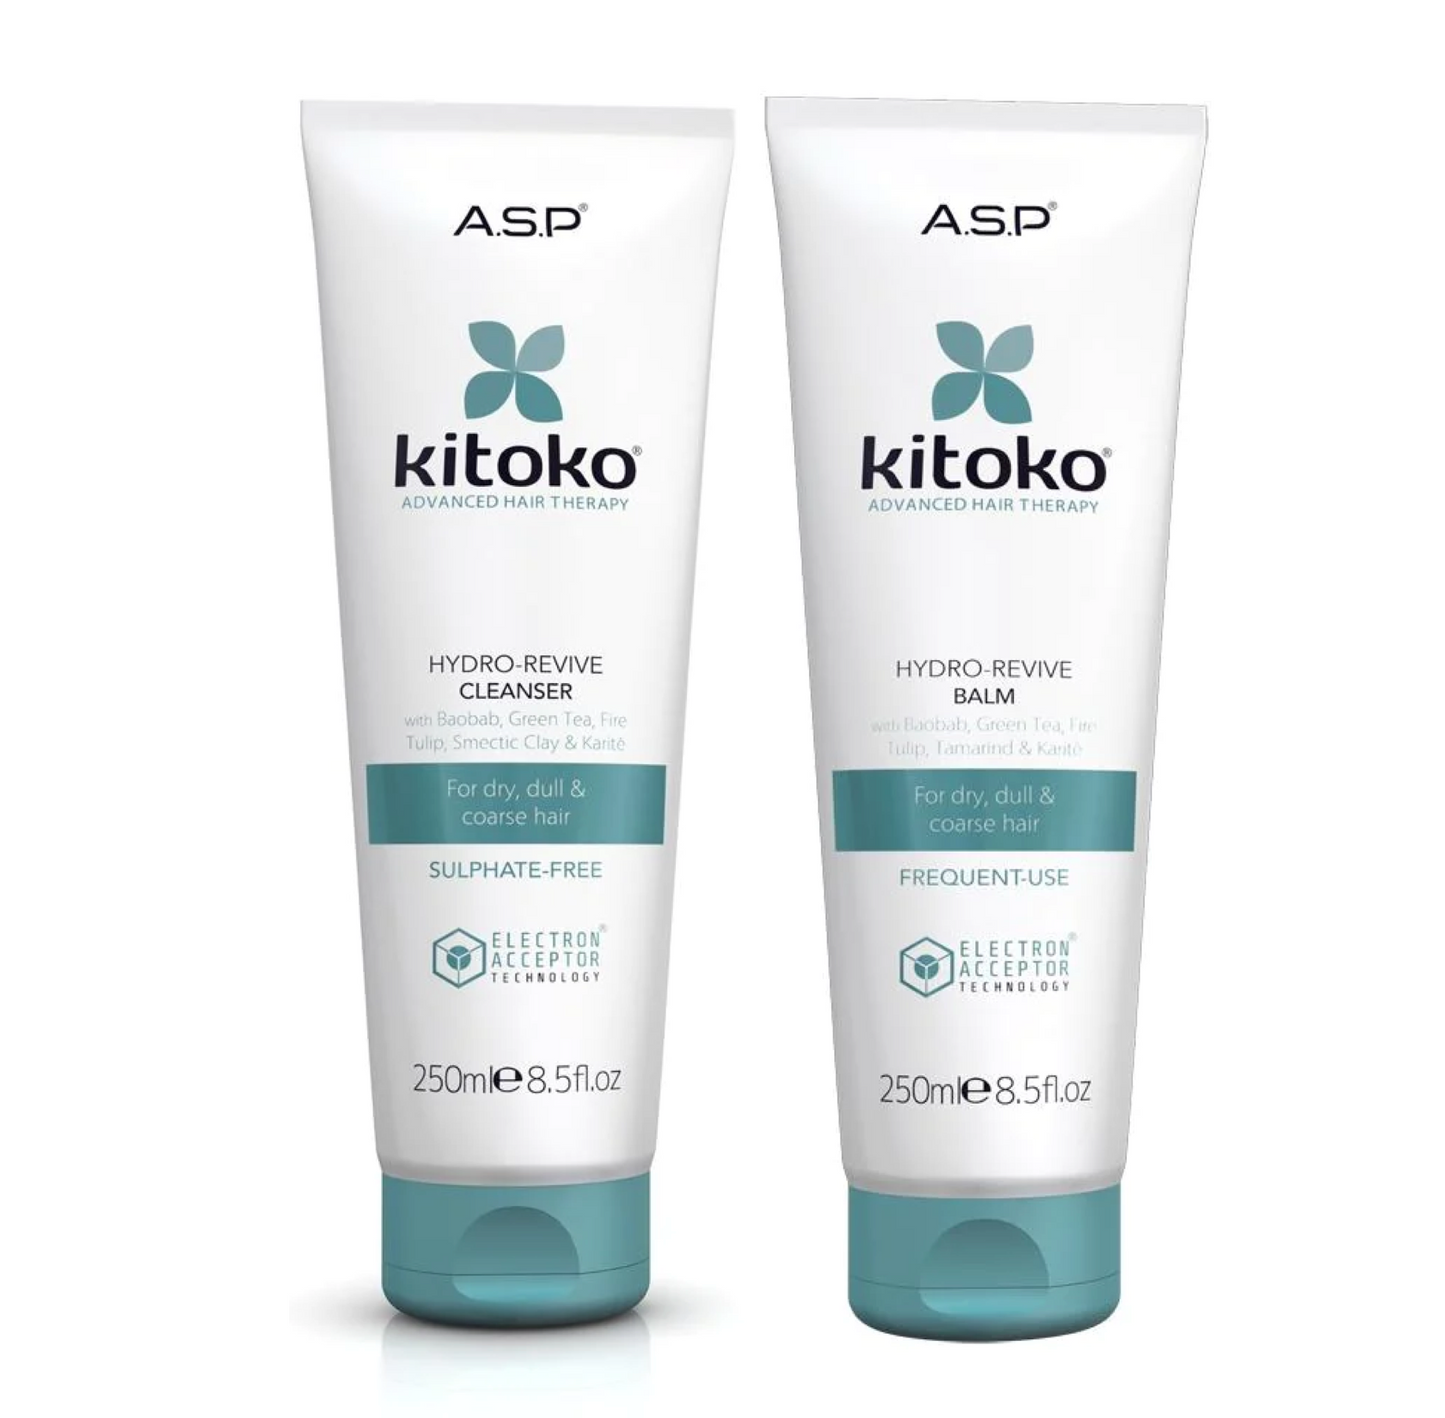 ASP Kitoko Hydro Revive Cleanser and Balm 250ml